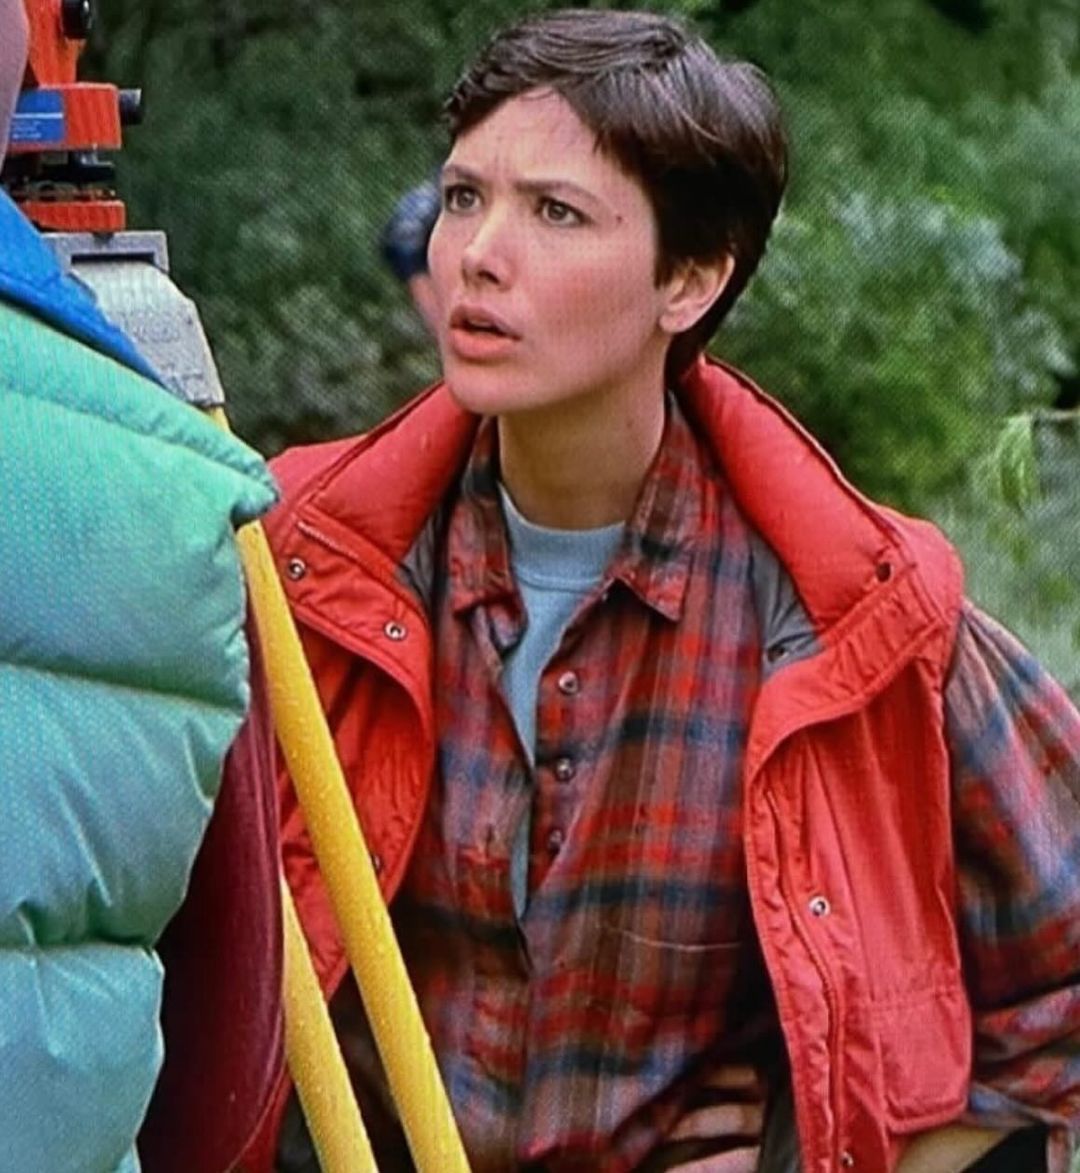 My character in #northernexposure Maggie O’Connell, was such an iconic character — she was the first of her kind. I absolutely treasured portraying her. Here are photos from a great episode… [1 of 3]
🙏❤️#northernexposure #art #love #maggieoconnell #streaming @PrimeVideo